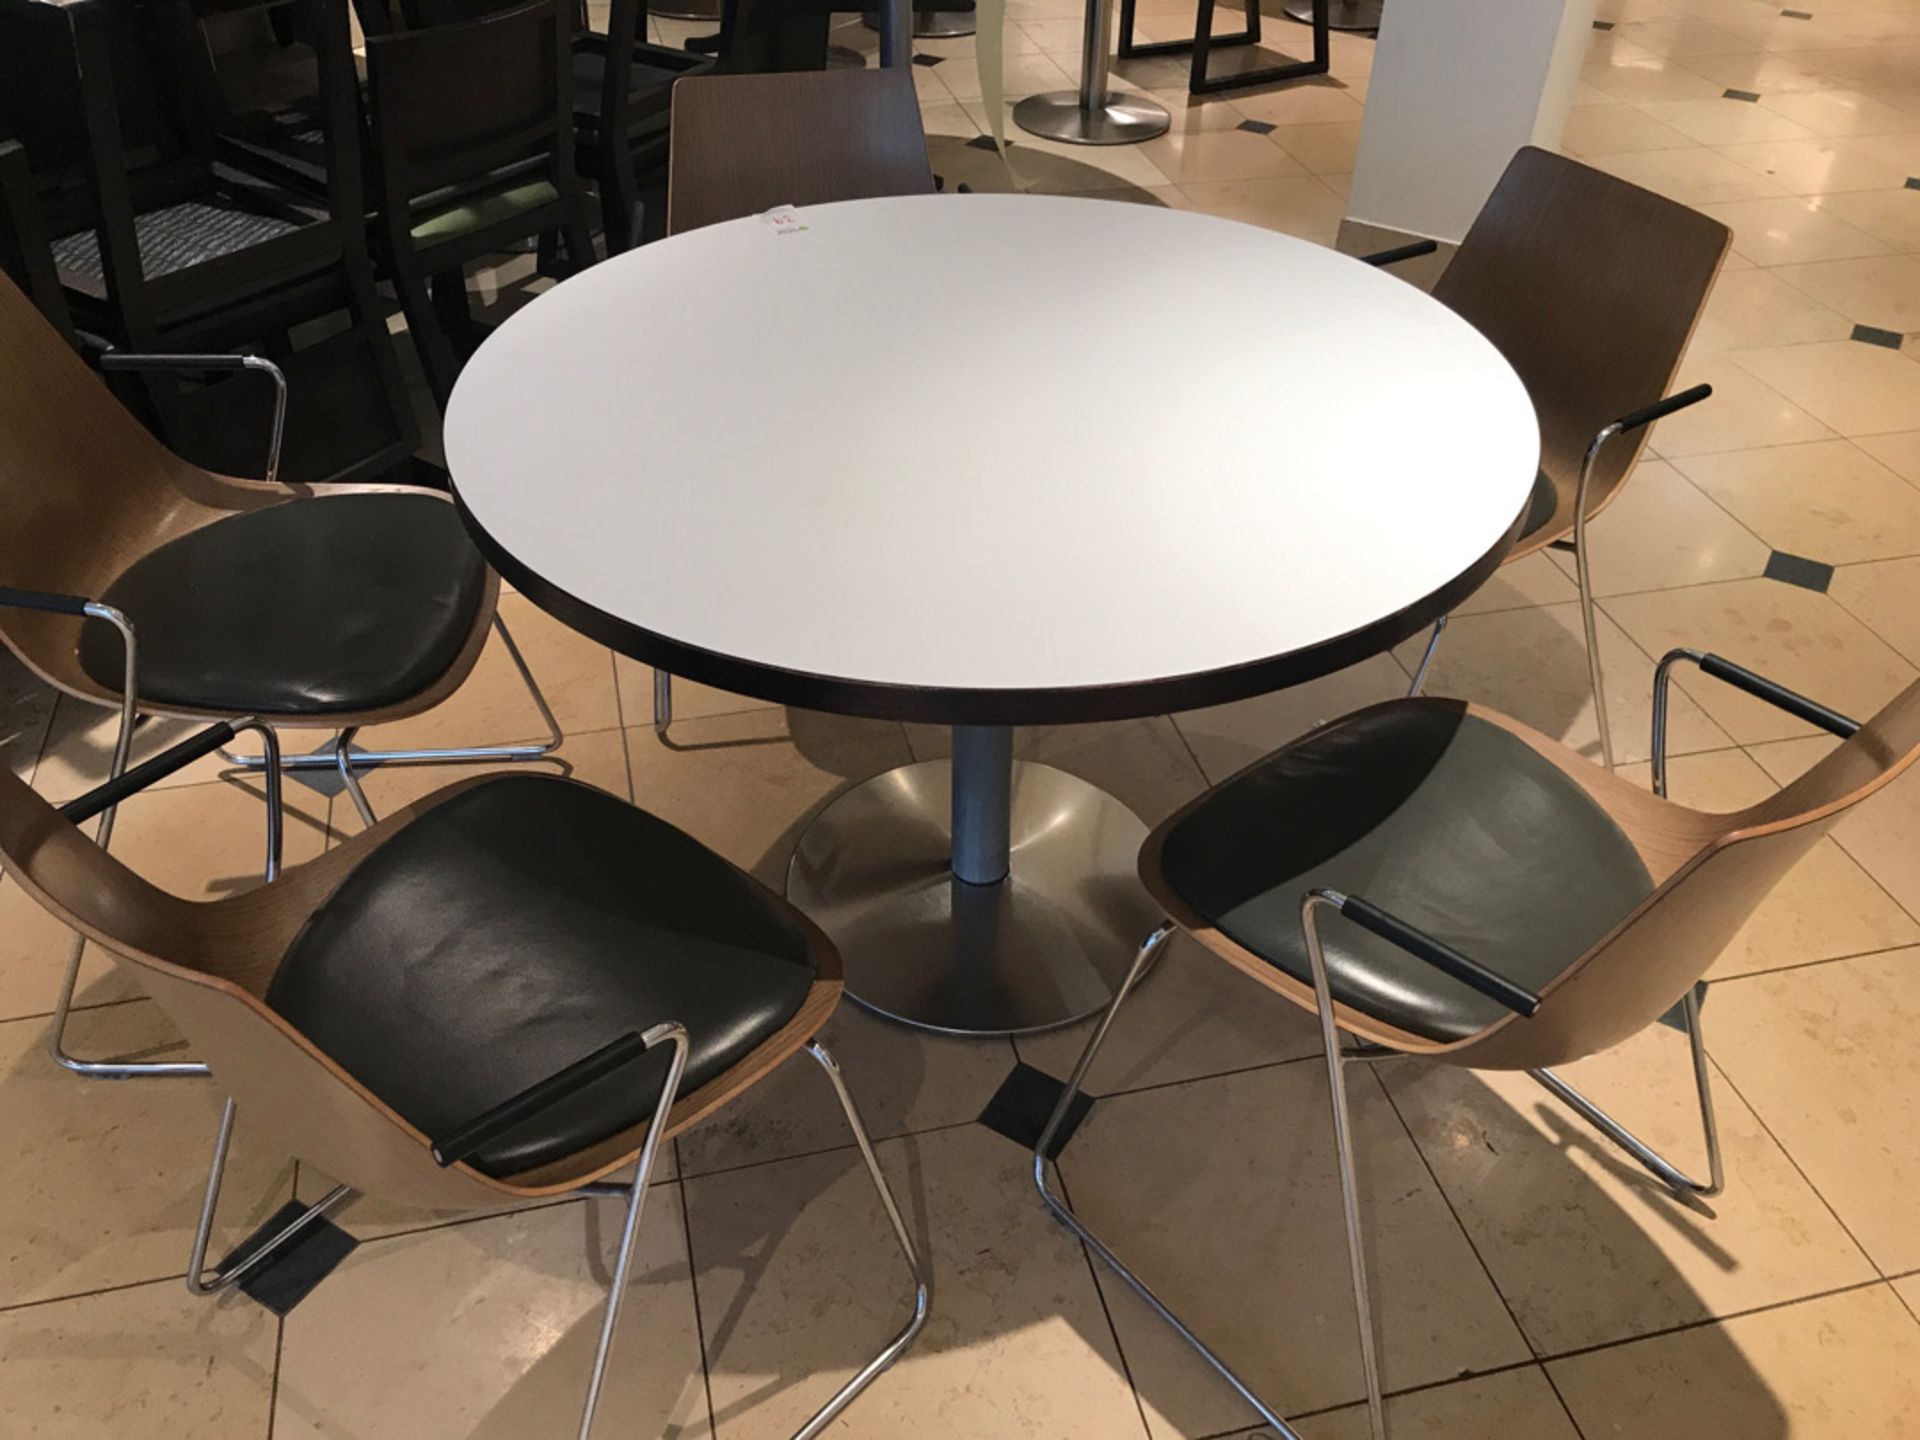 Large pedestal table with five modern designer chairs